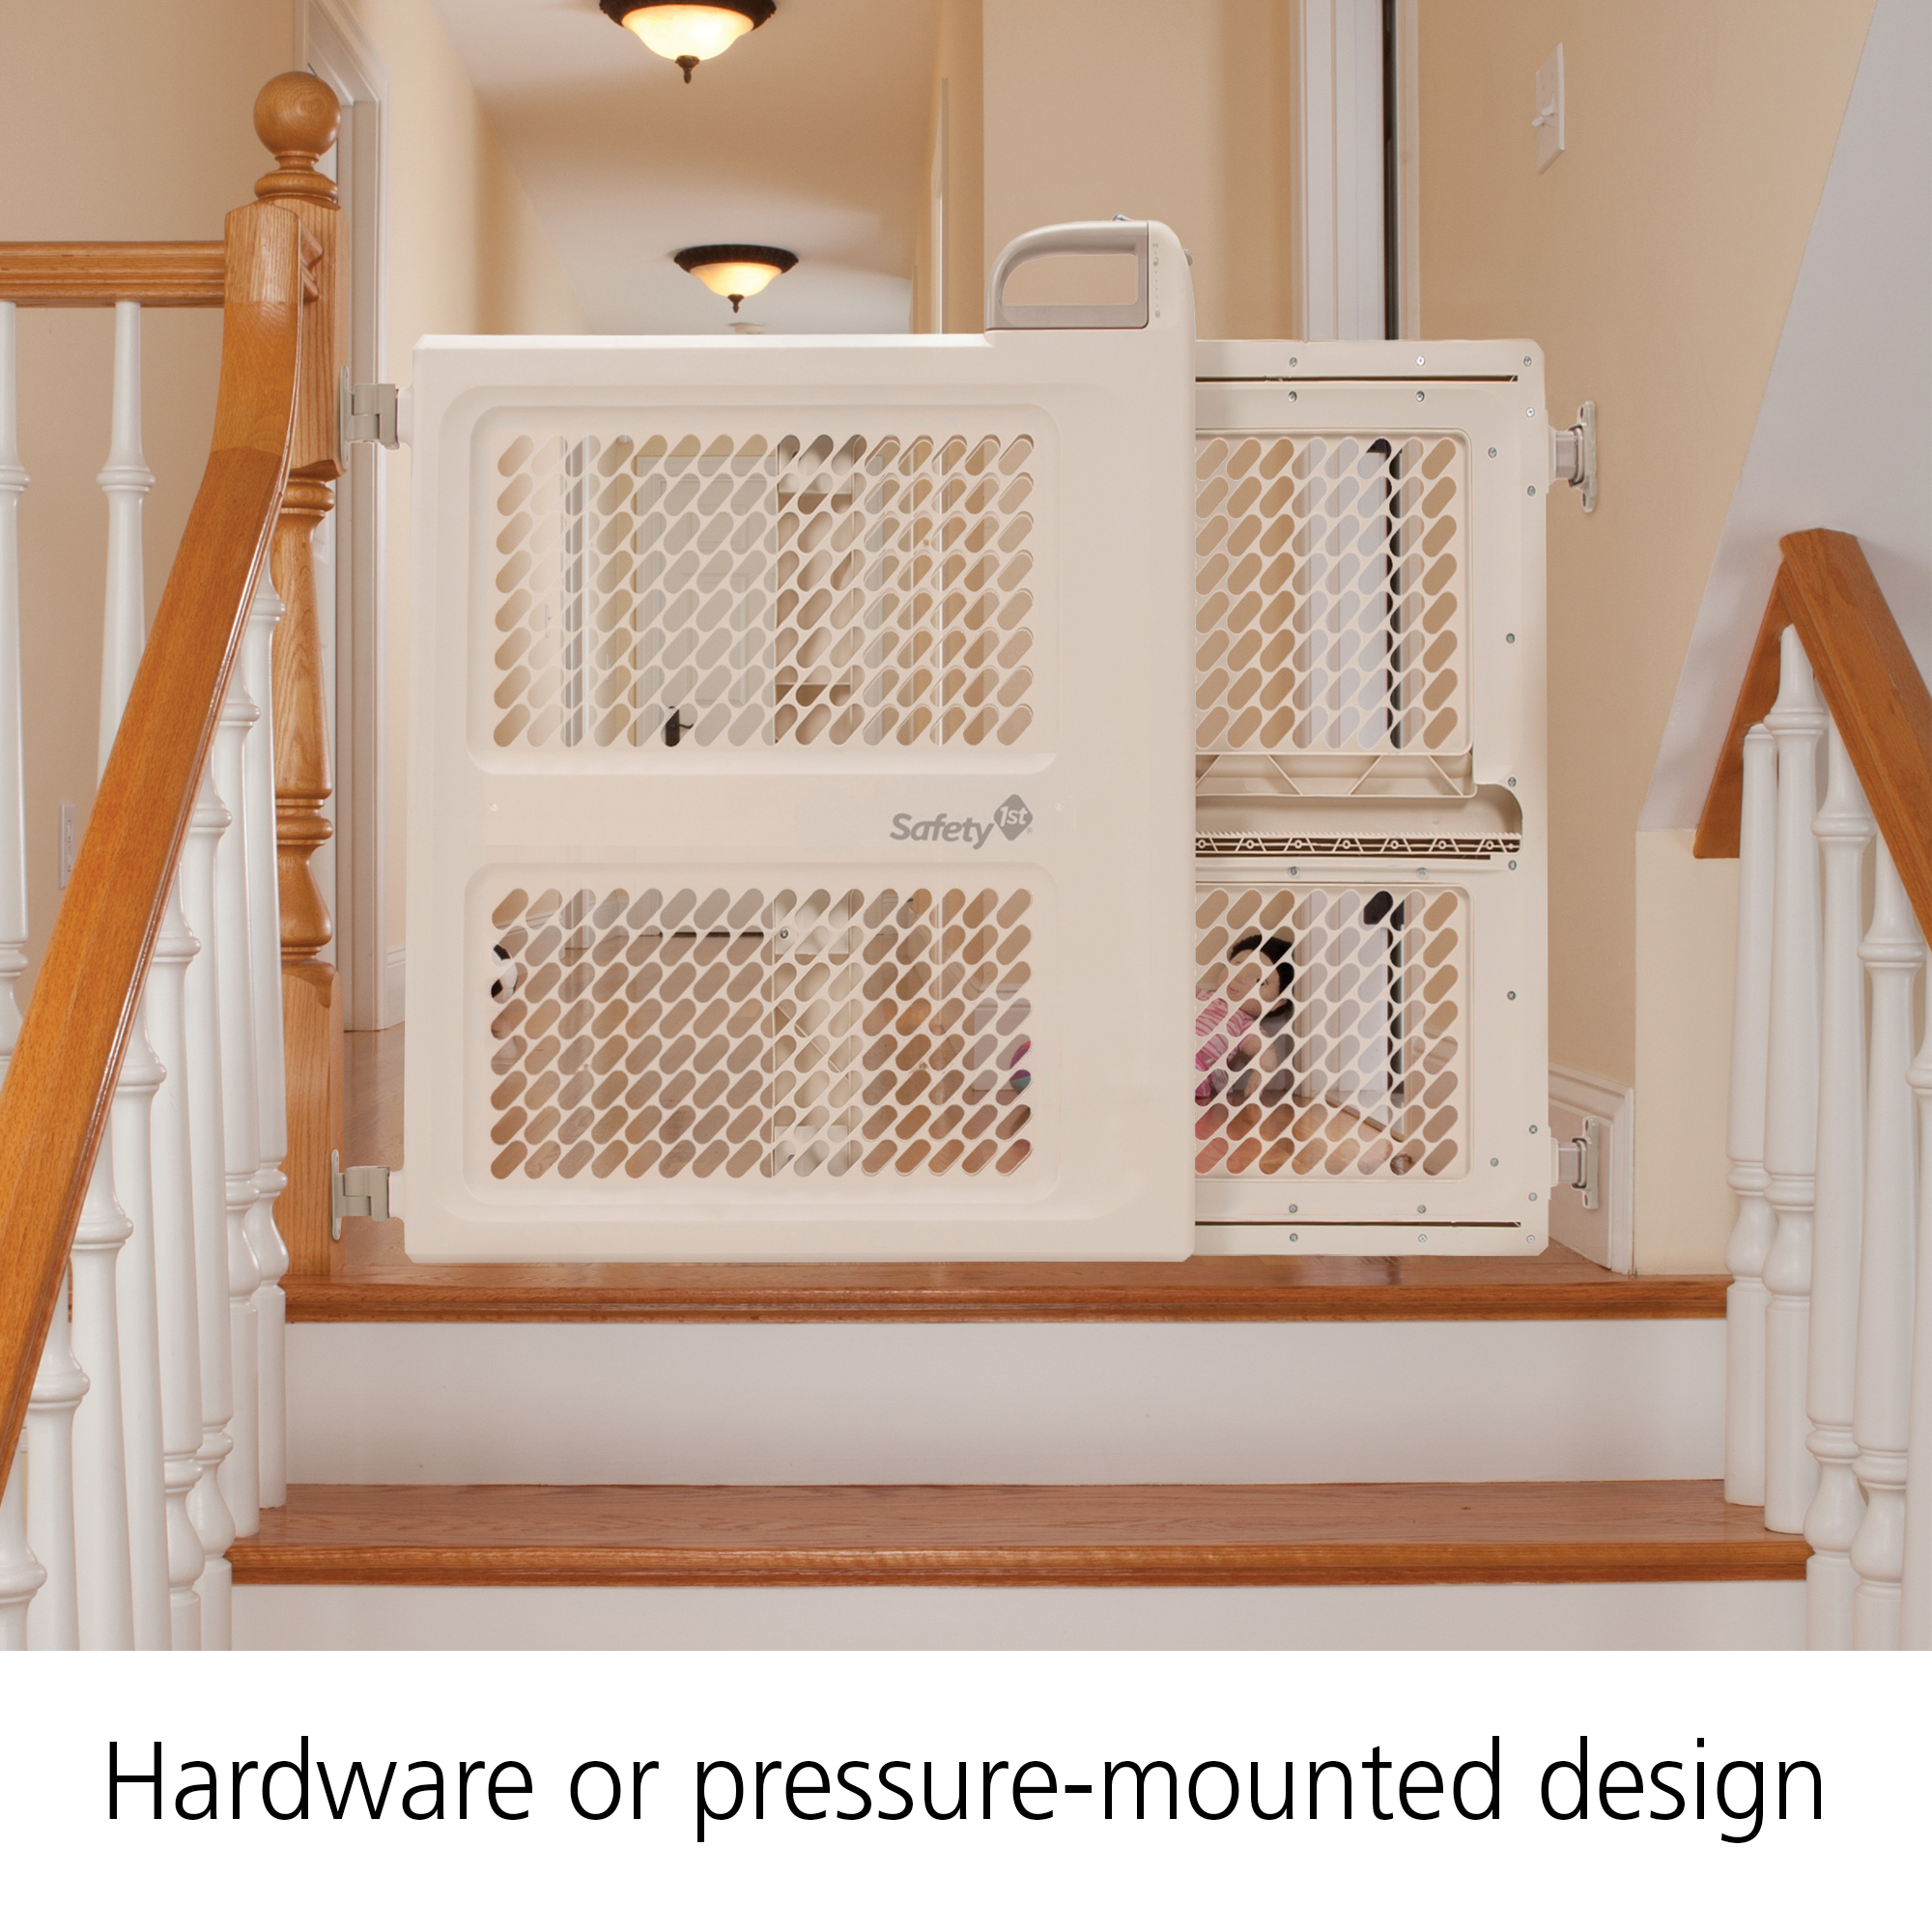 Lift, Lock & Swing Dual-Mode Gate - great for homes with babies and pets